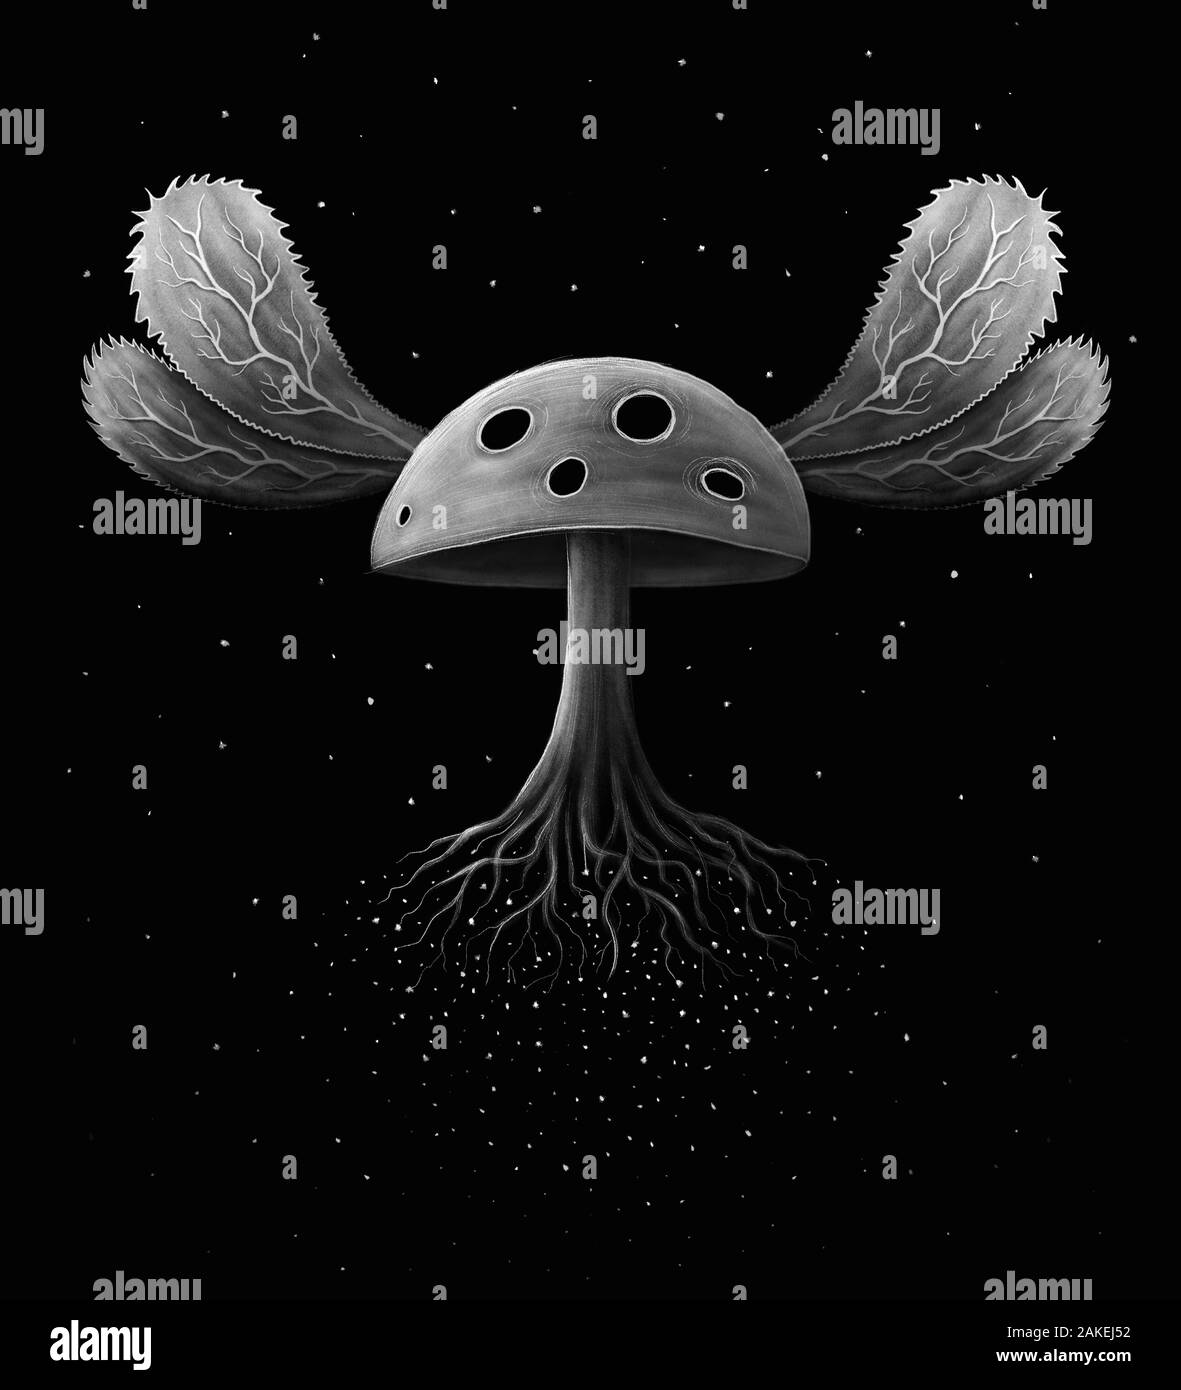 Mushroom With Wings Flying in Space. Hand Drawn Digital Illustration on Black Background. Designed for printing, posters, T-shirts etc. Stock Photo